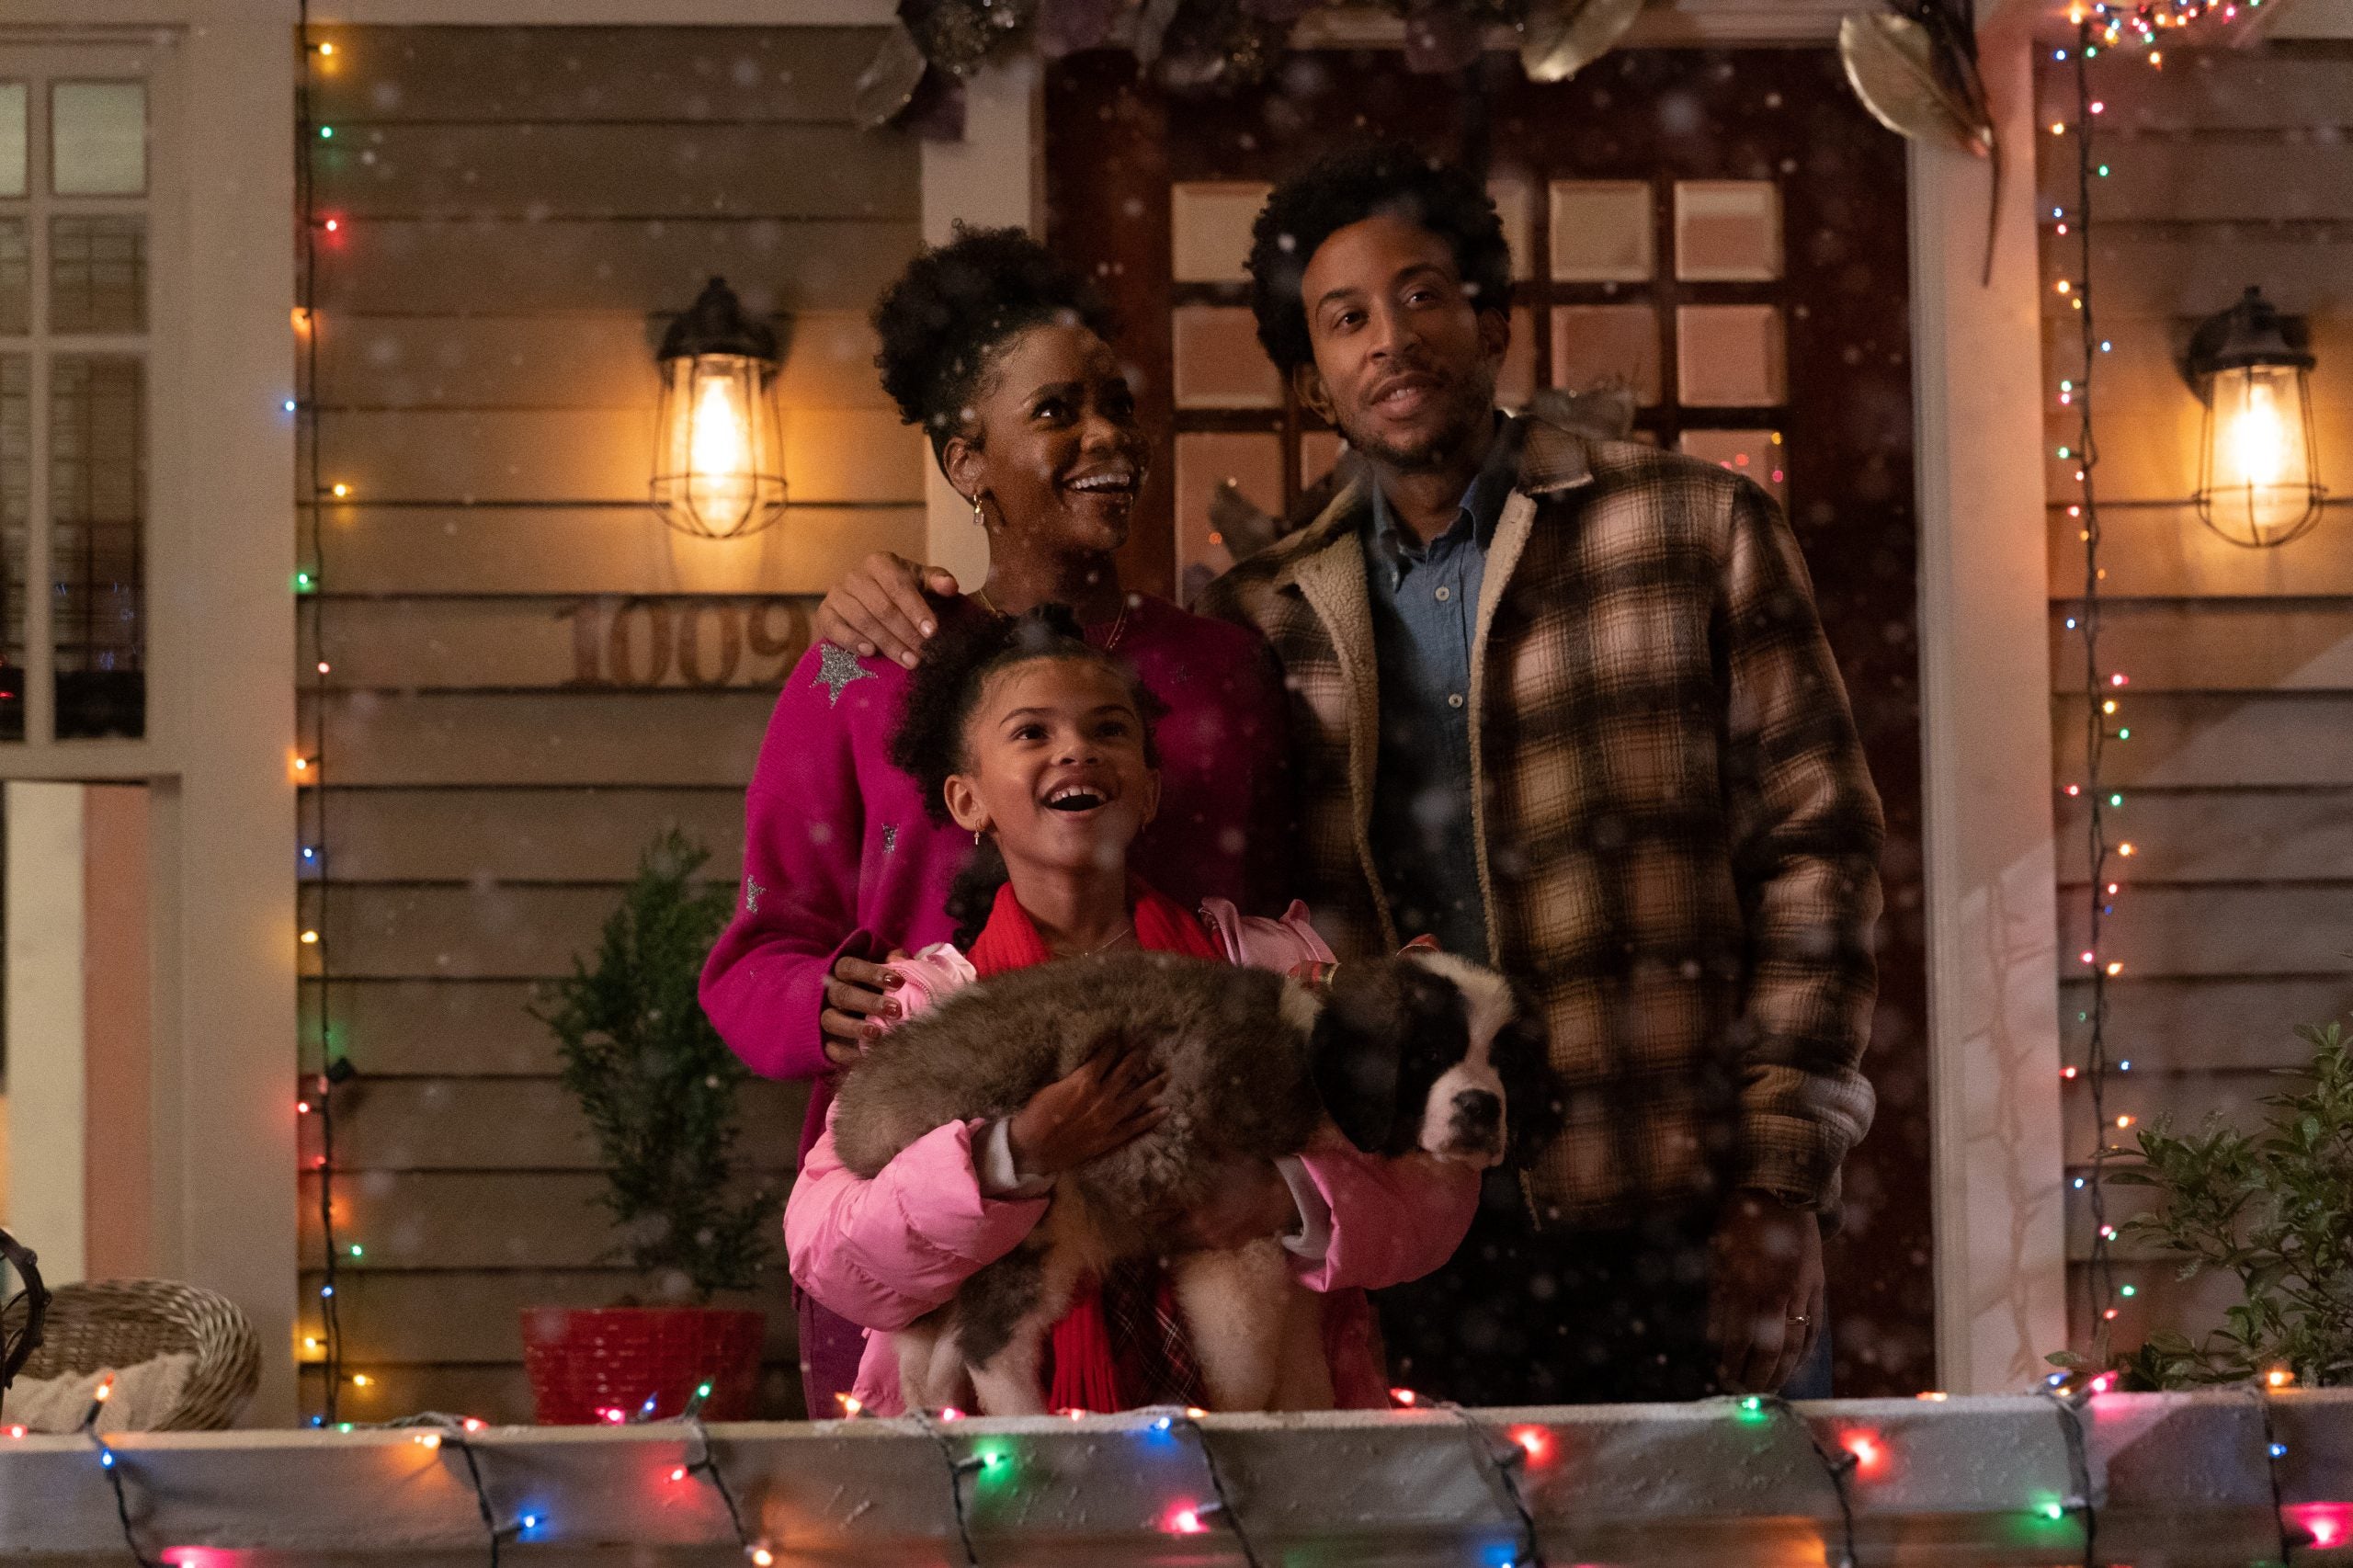 Ludacris, Teyonah Parris And Lil Rel Howery Get Into The Spirit In ‘Dashing Through The Snow’ Trailer